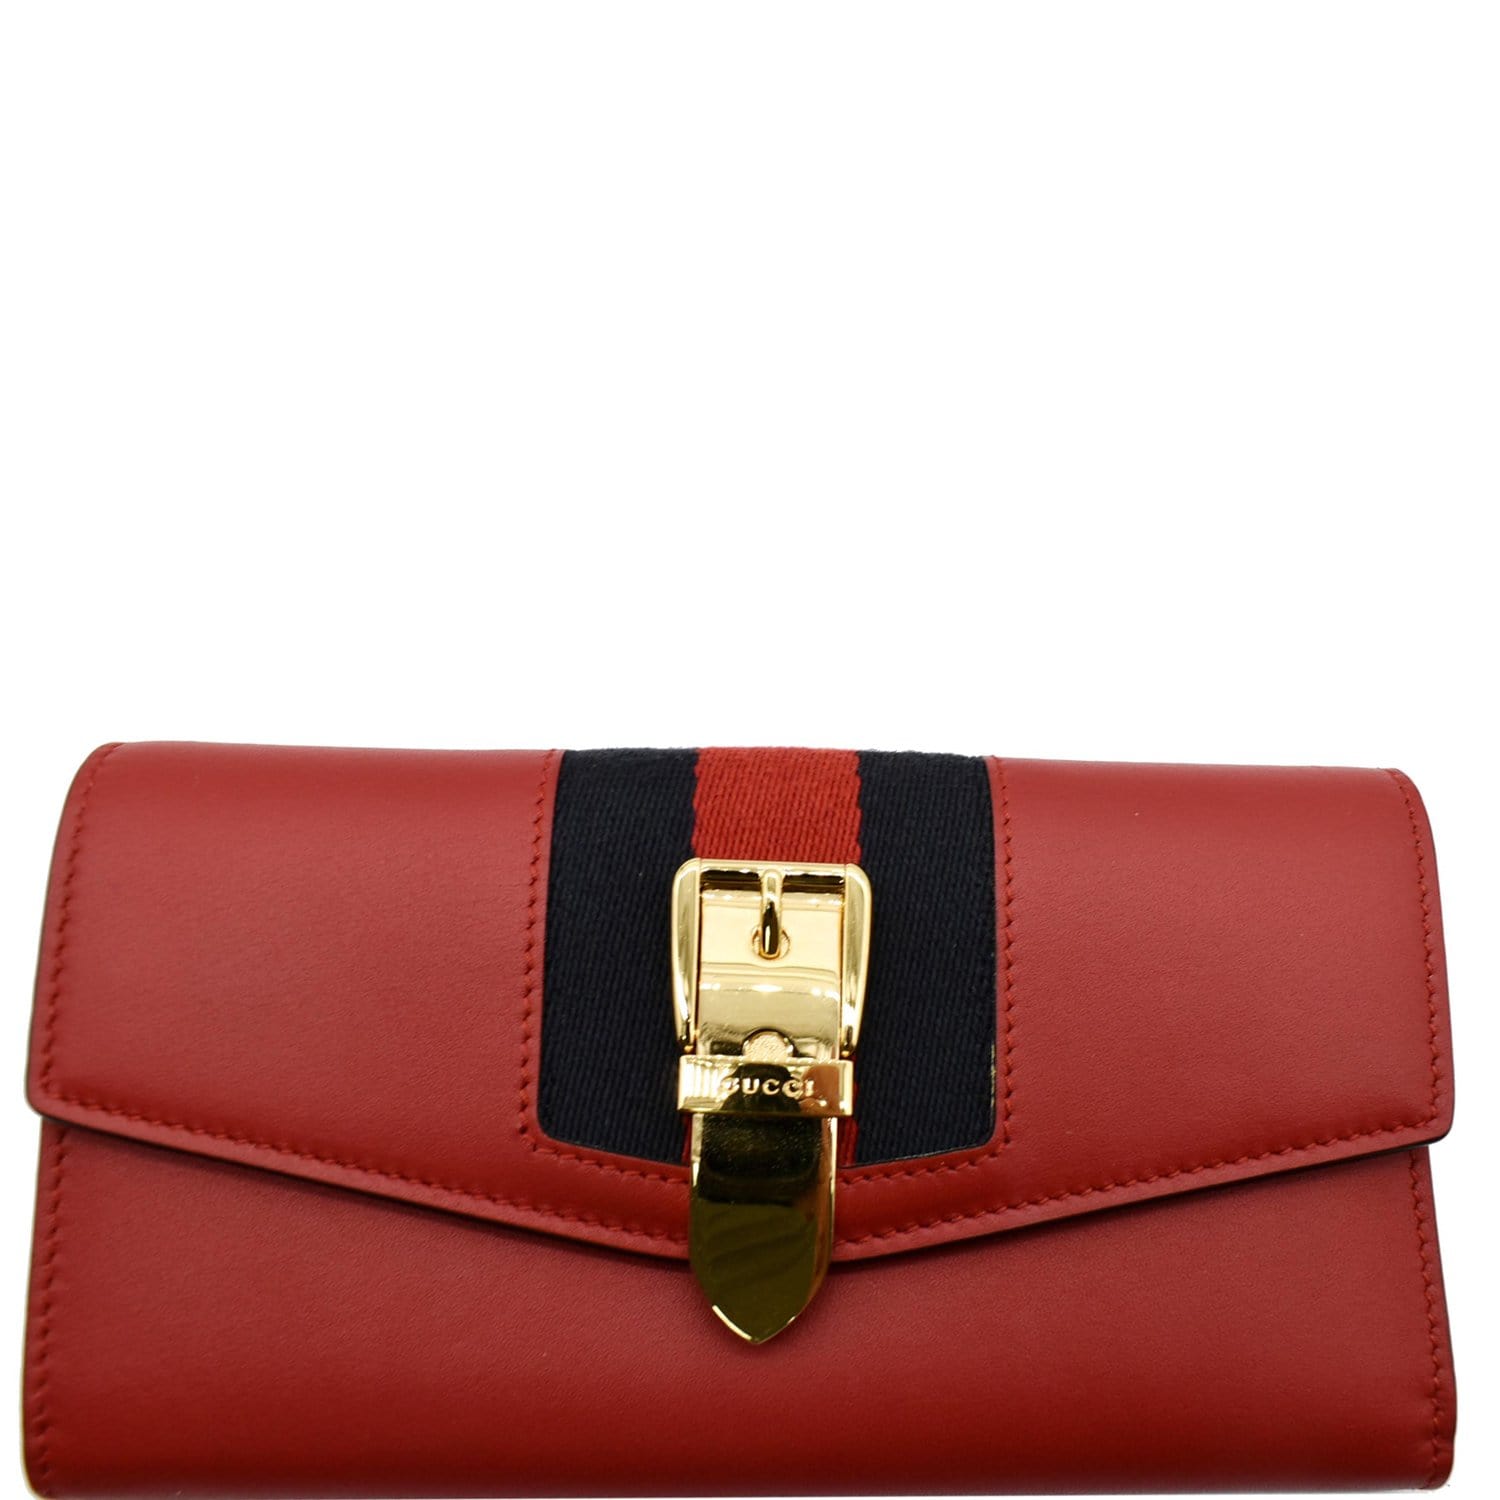 Leather Iside continental purse with chain